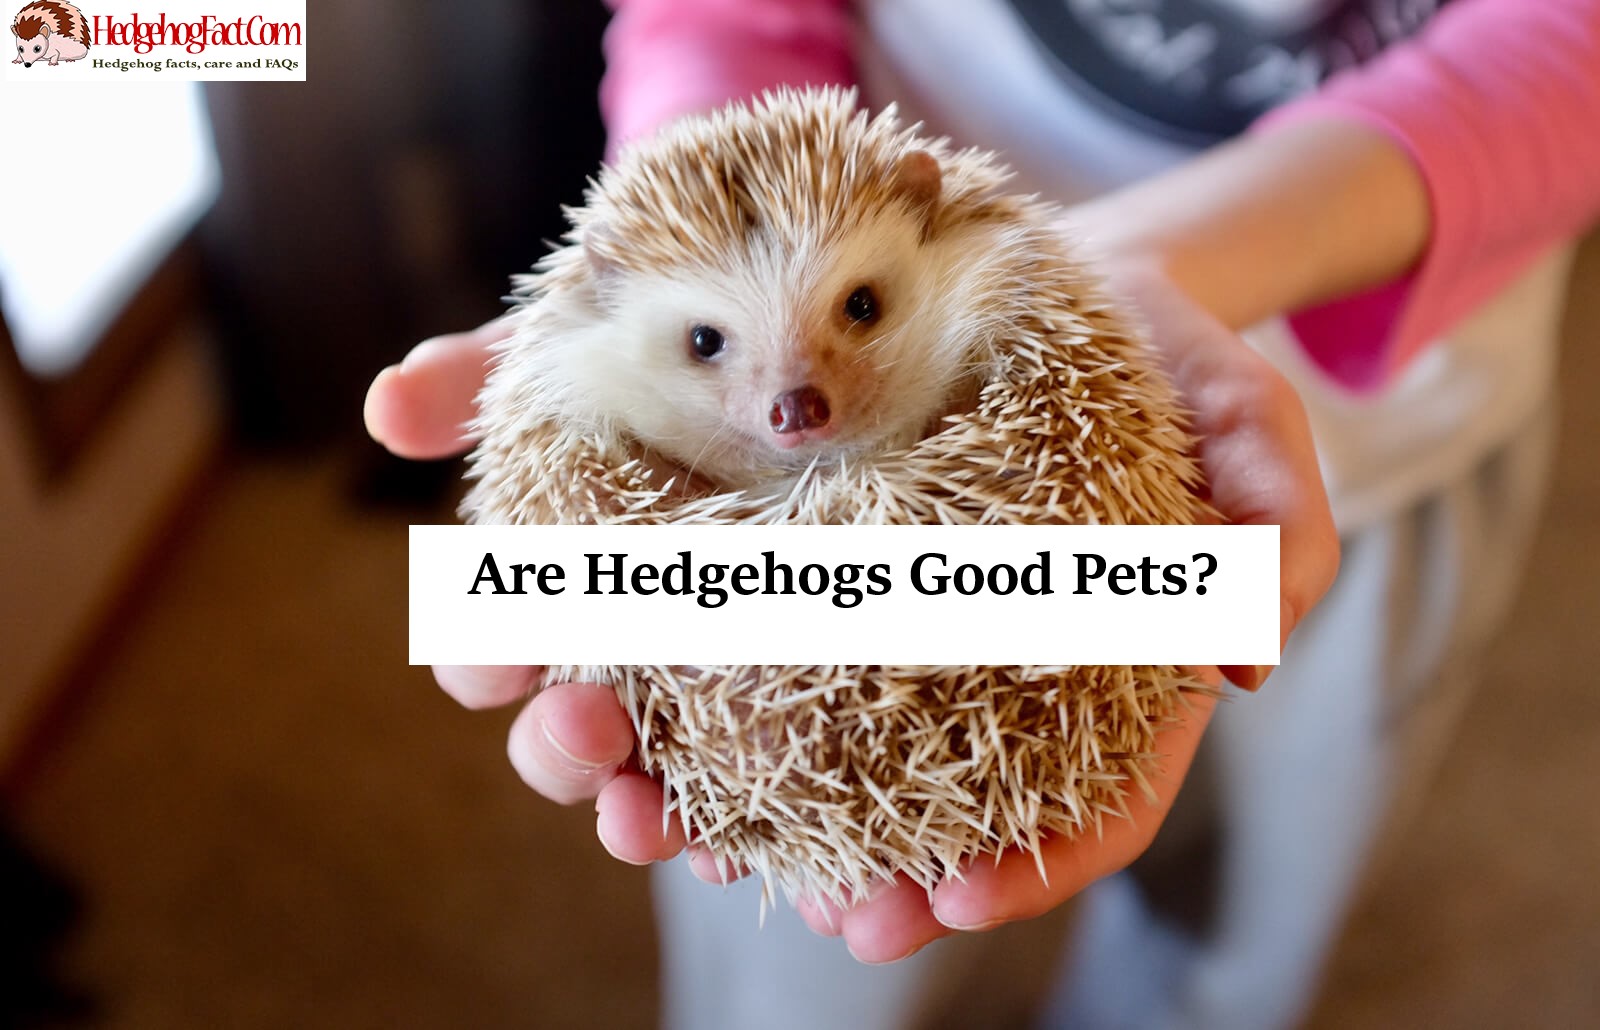 Are Hedgehogs Good Pets?